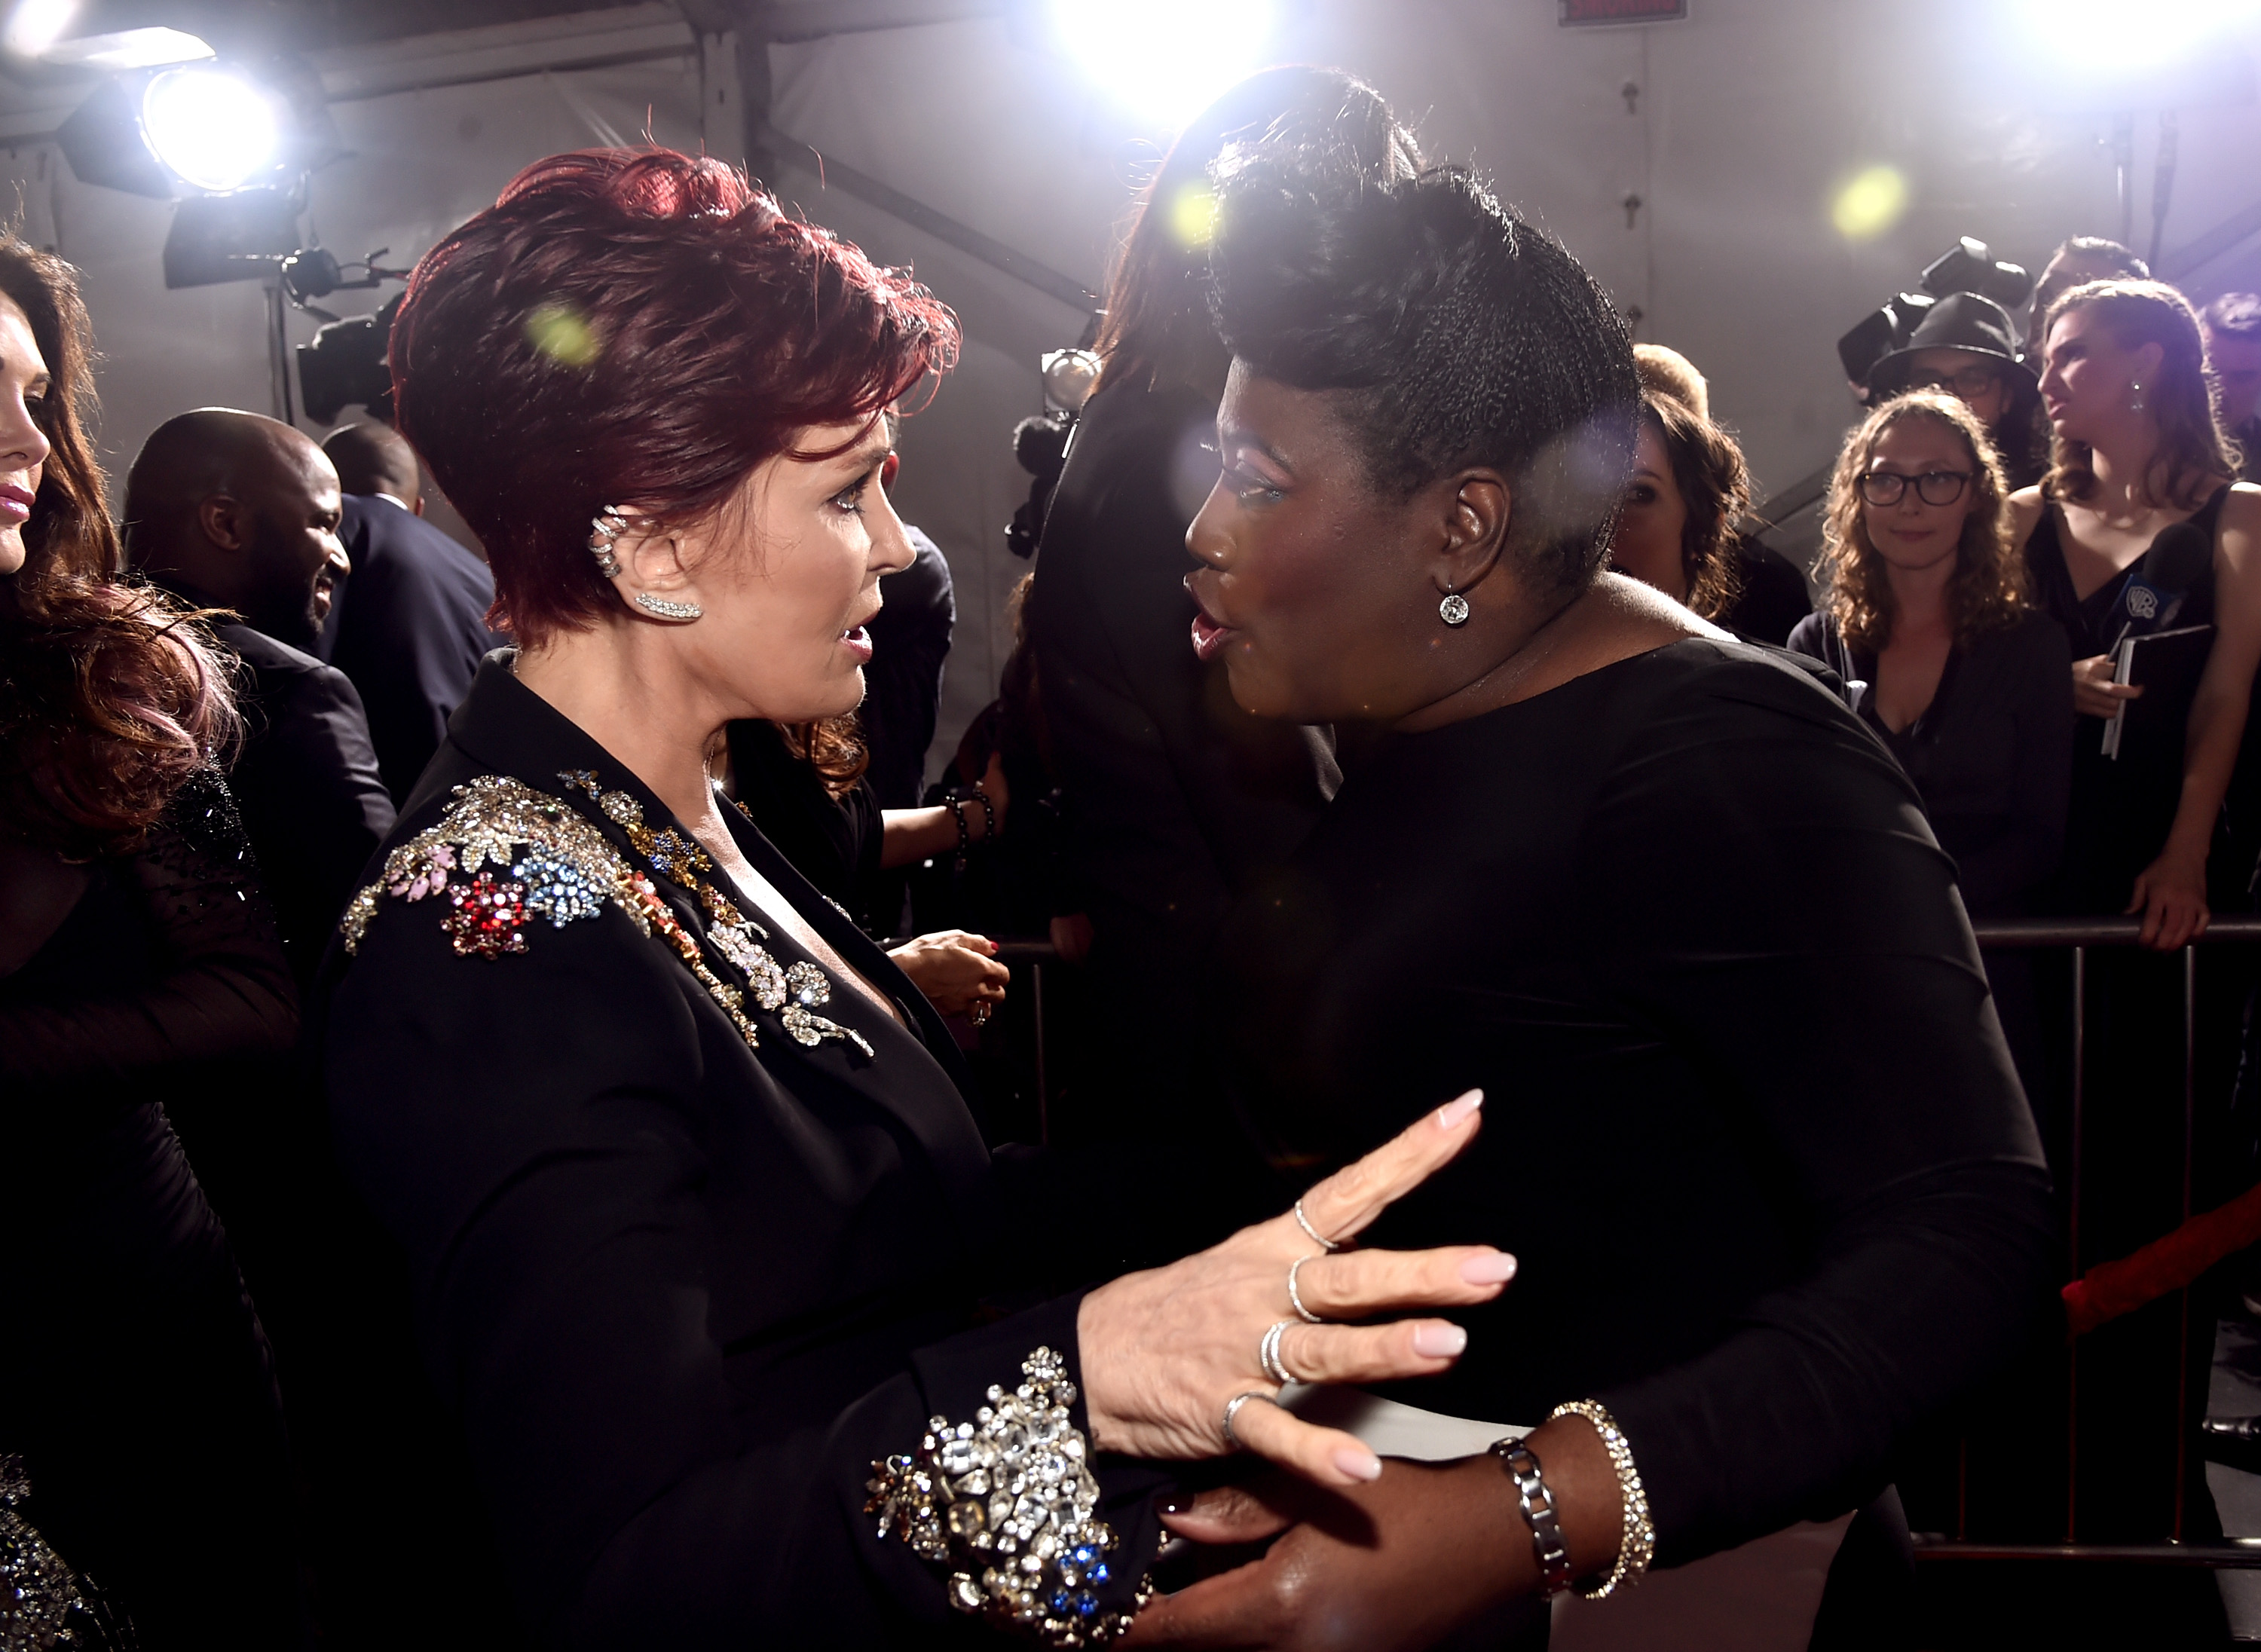 Sharon Osbourne and Sheryl Underwood talking during an event in 2016